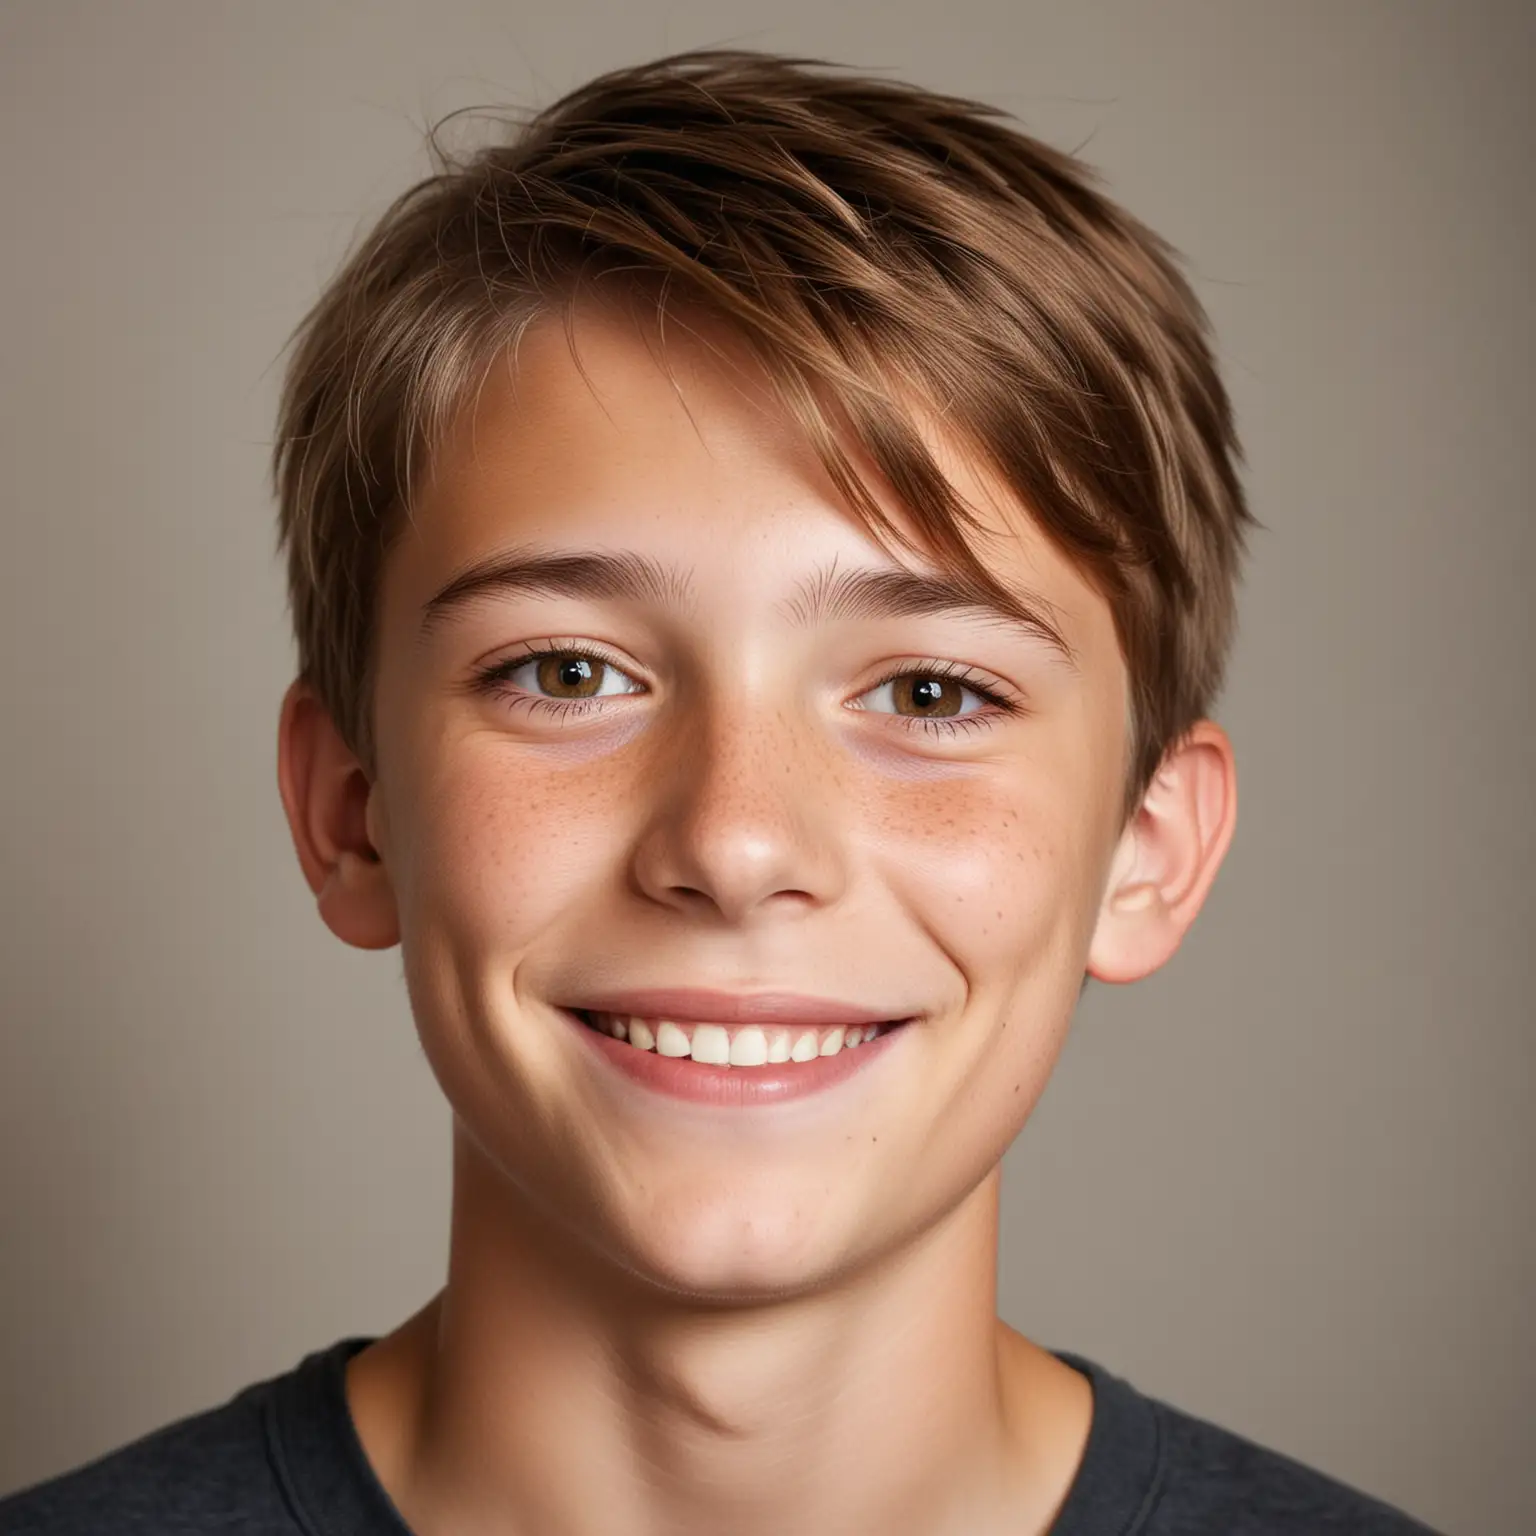 Smiling TwelveYearOld Boy with Soft Light Brown Hair and Freckles